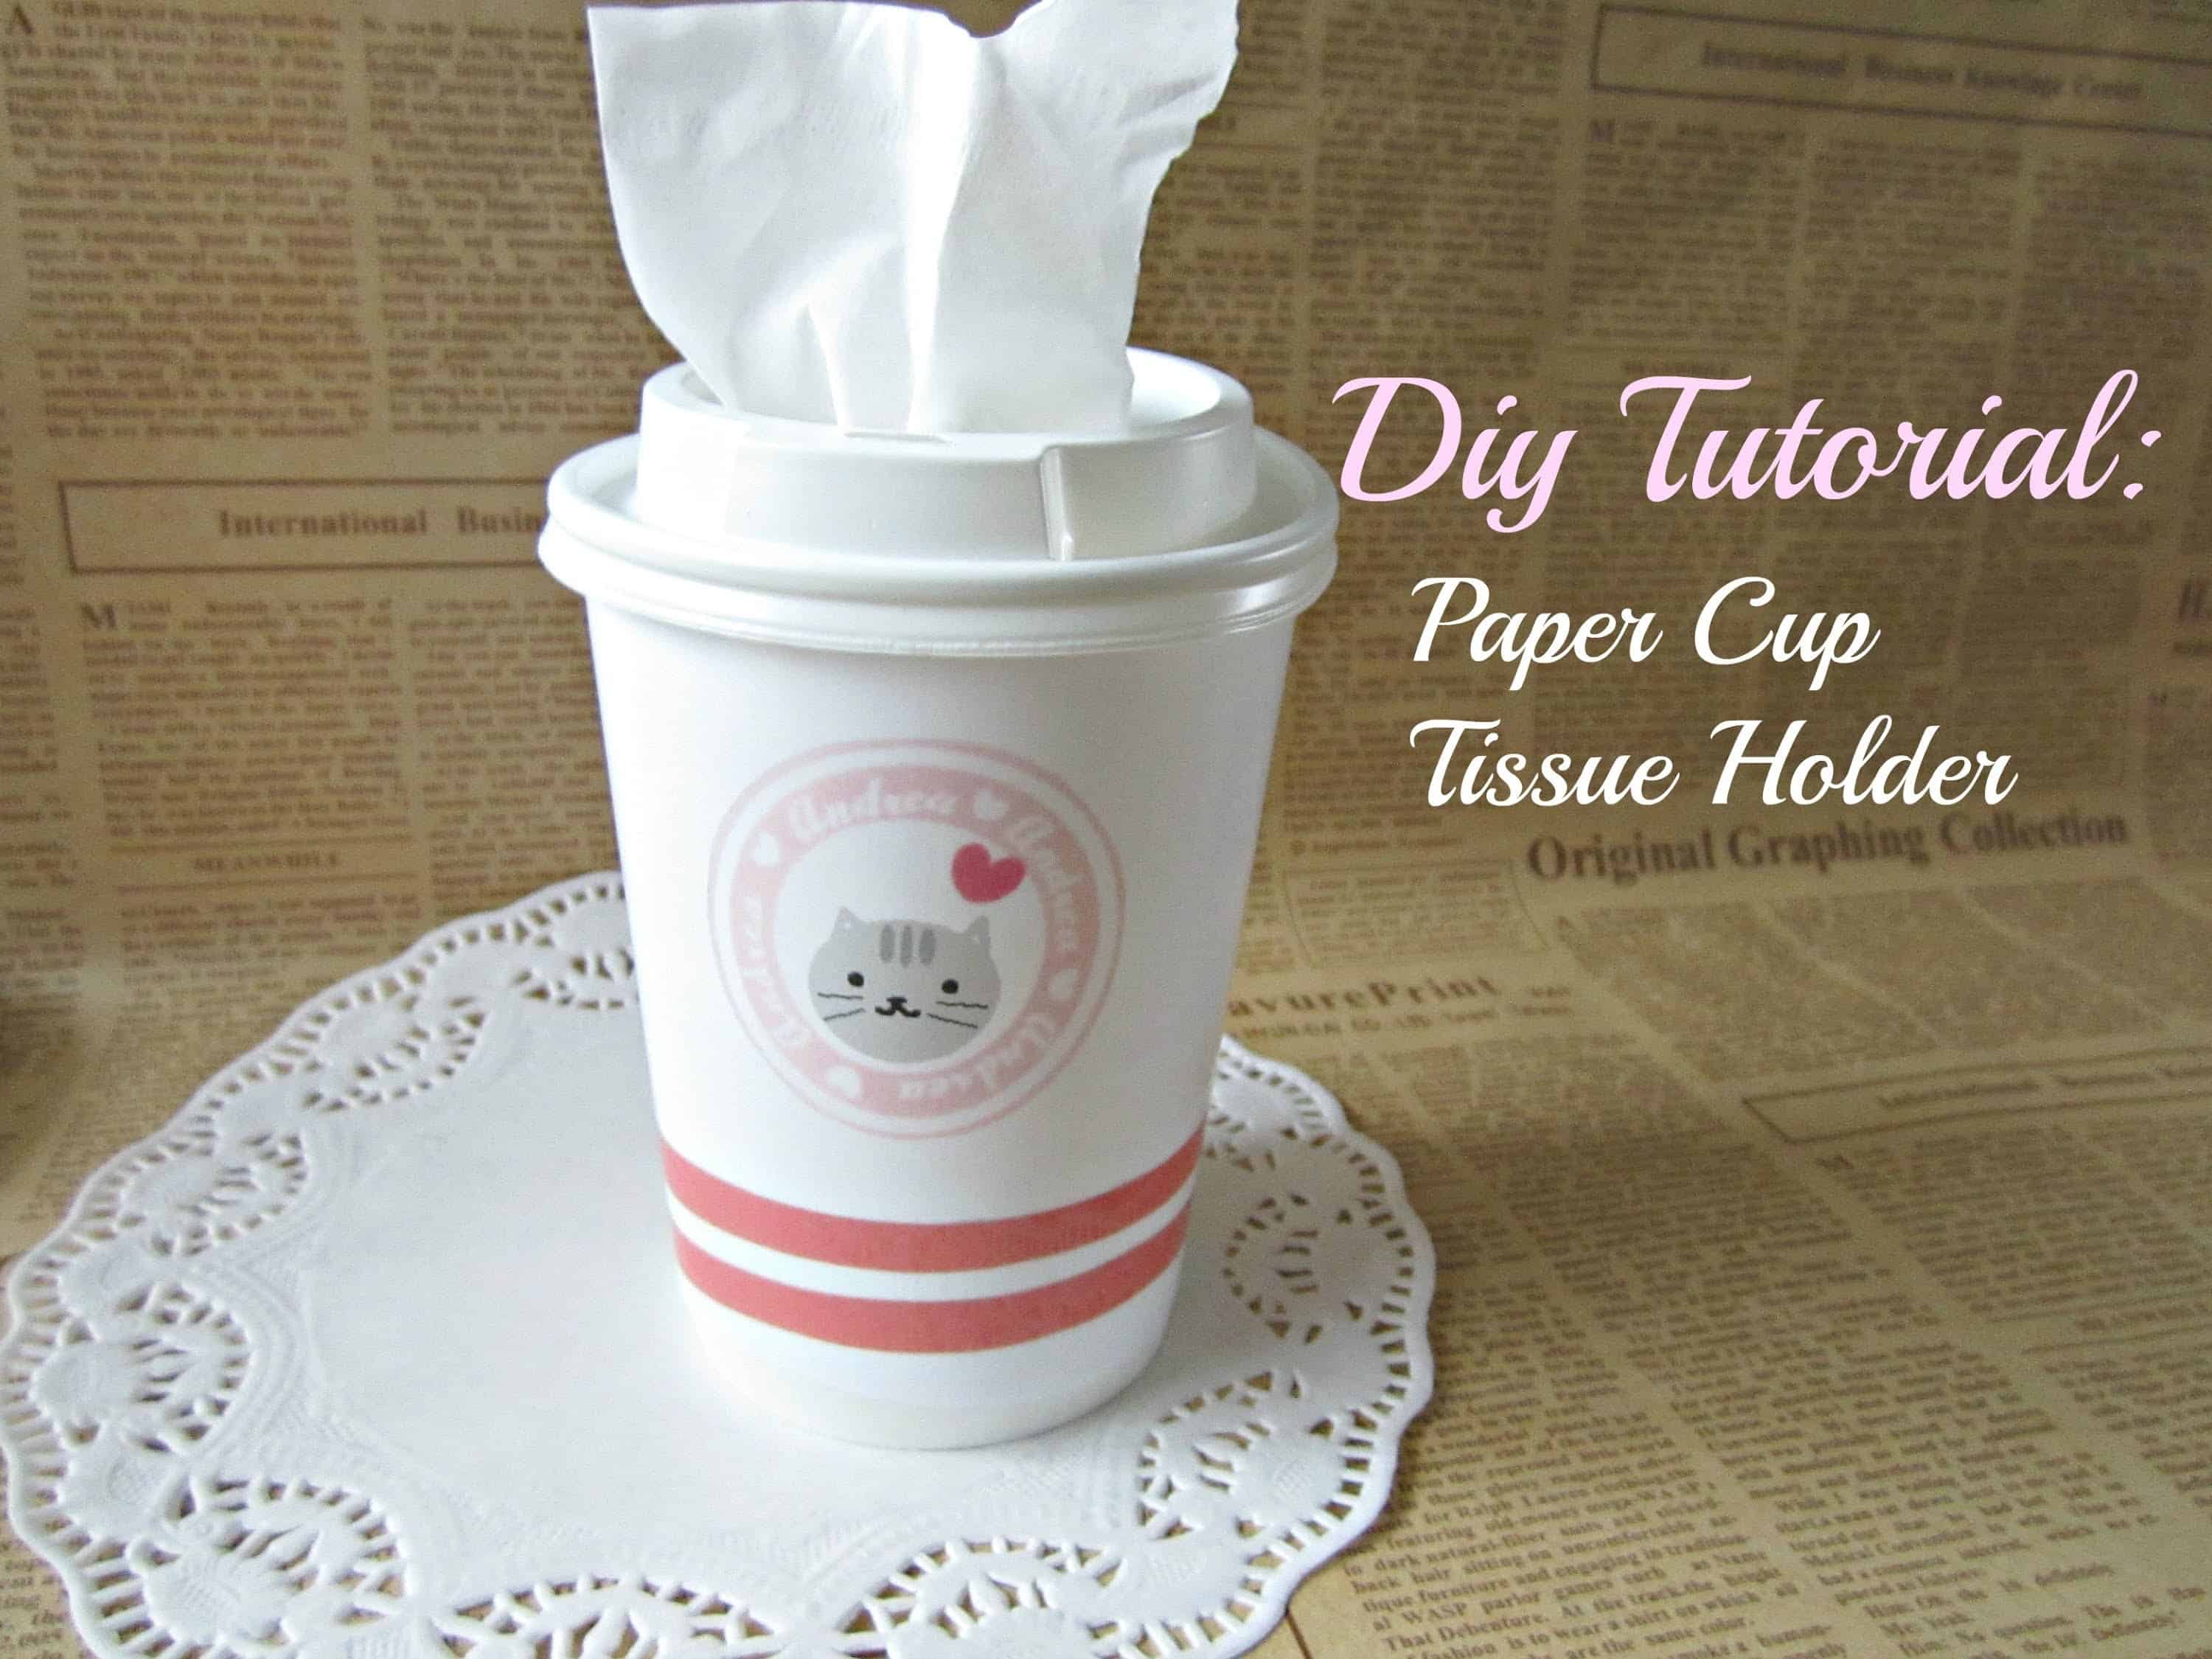 Paper cup tissue holder